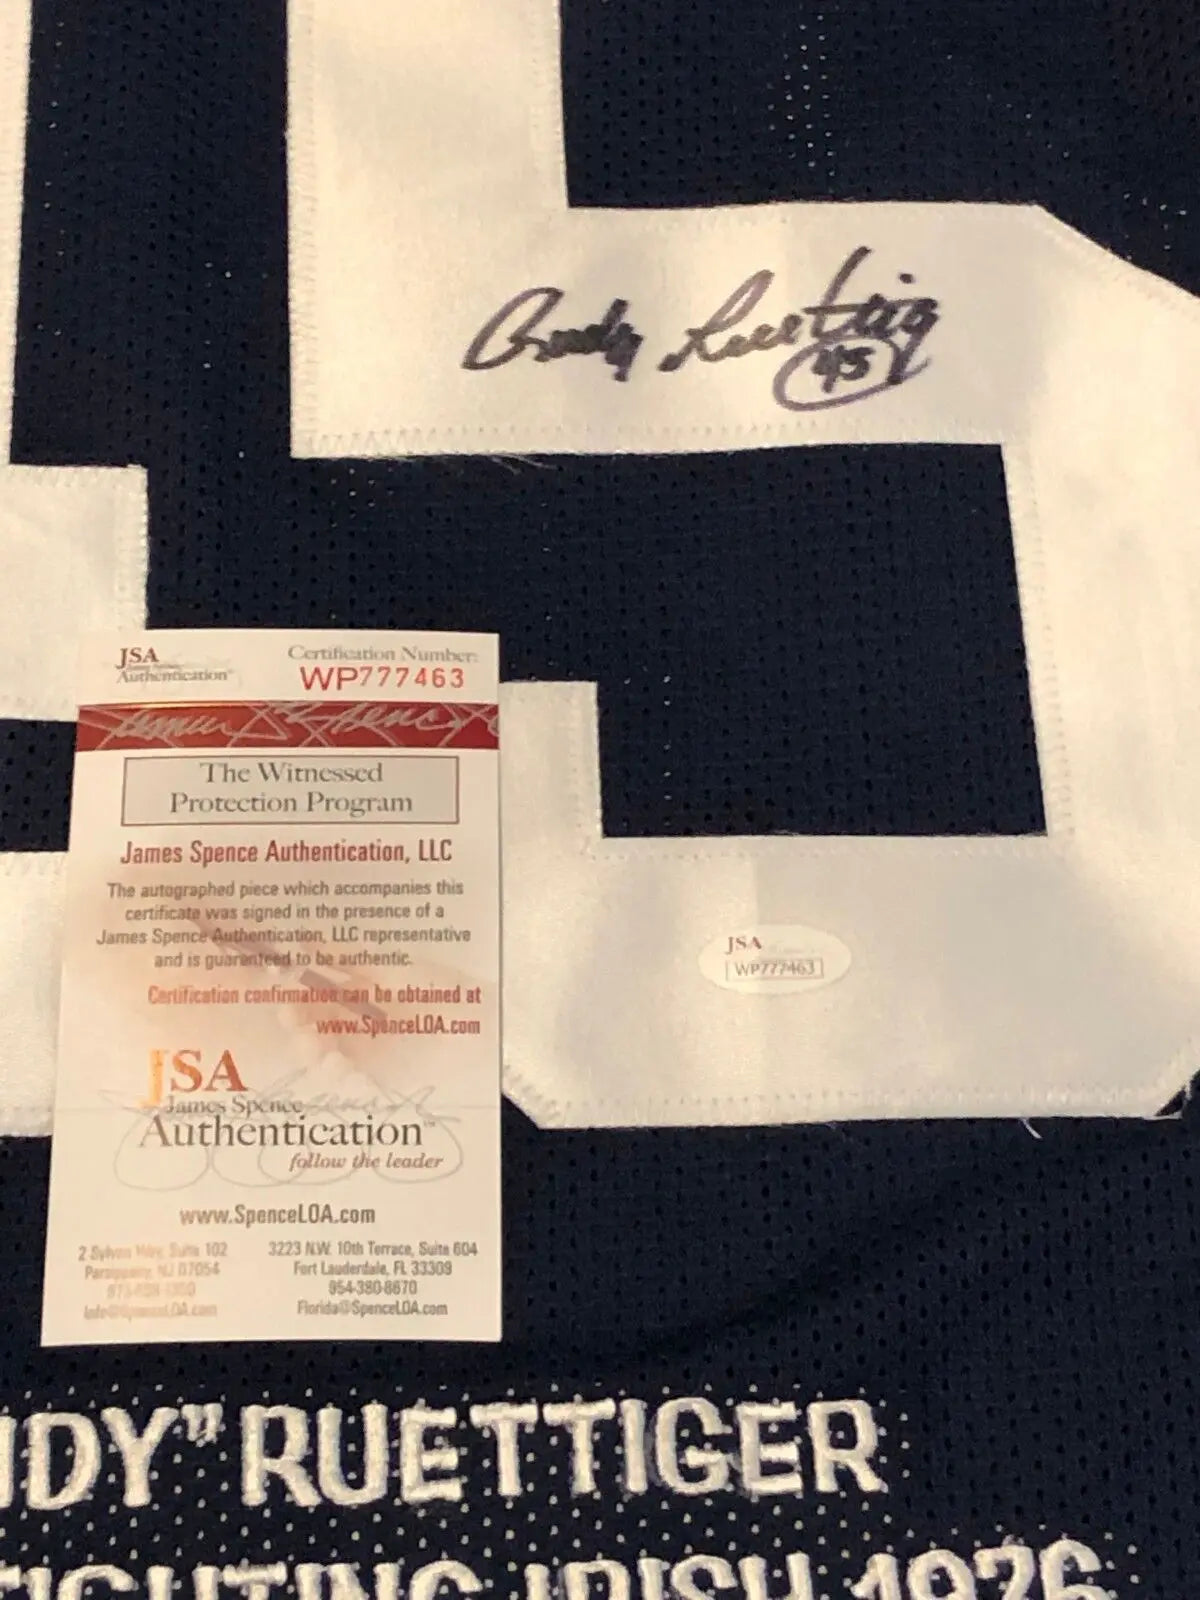 Rudy Ruettiger Signed Autographed Blue Stat Football Jersey JSA COA - Notre  Dame Fighting Irish Movie Legend - Size XL at 's Sports Collectibles  Store